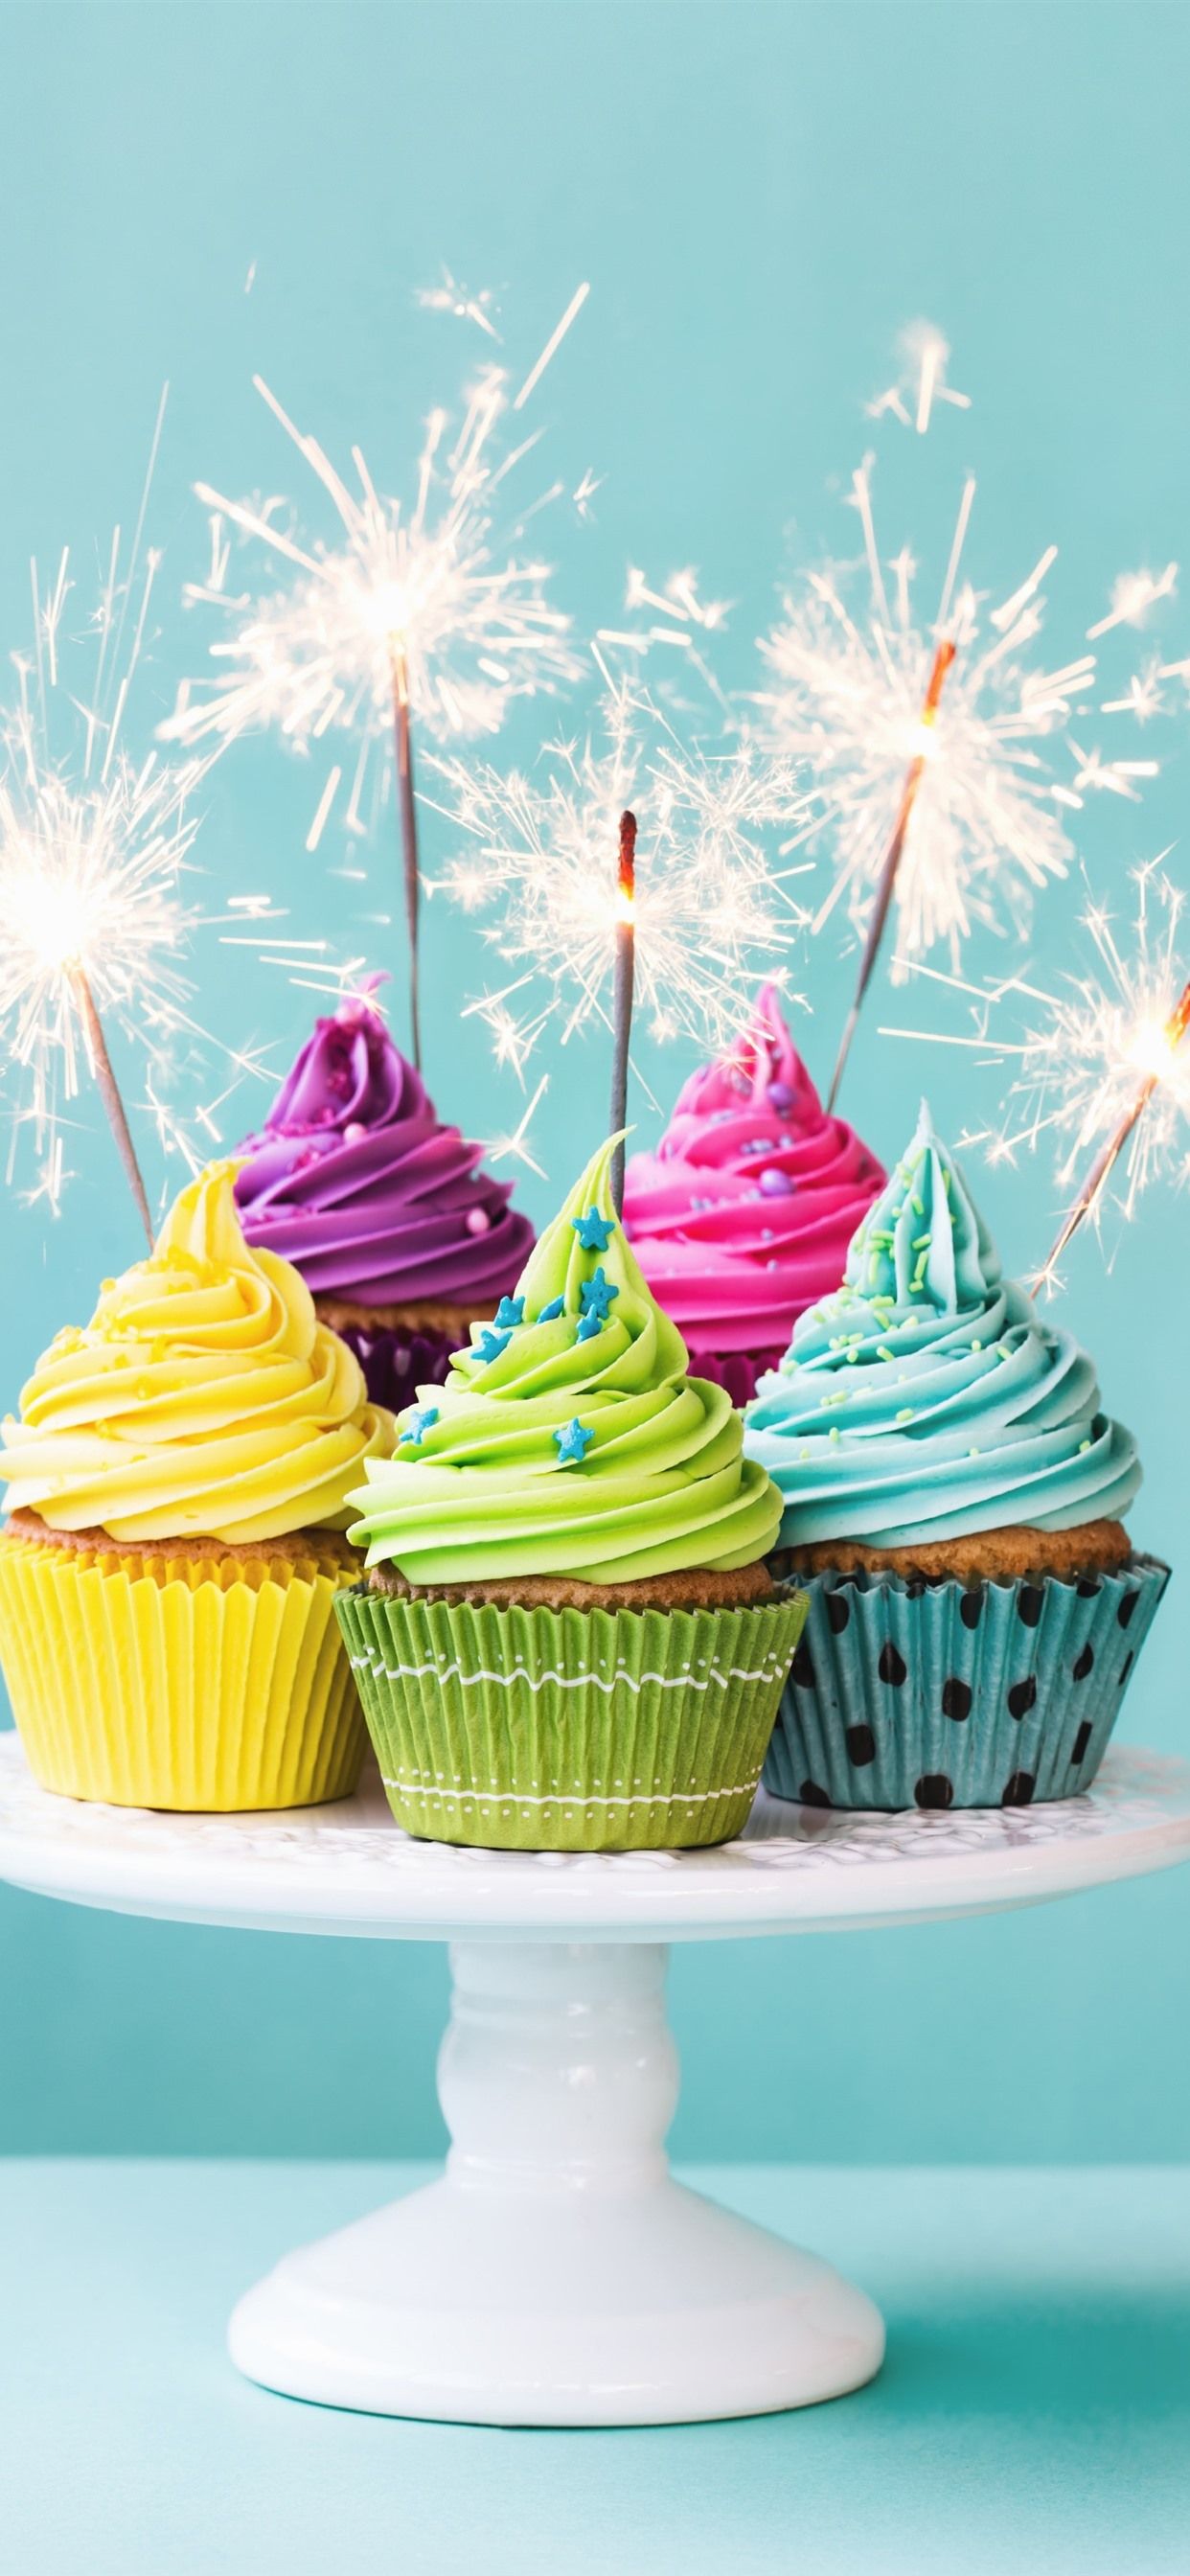 Wallpaper Colorful cupcakes, cream, fireworks, sparks, Birthday 5120x2880 UHD 5K Picture, Image